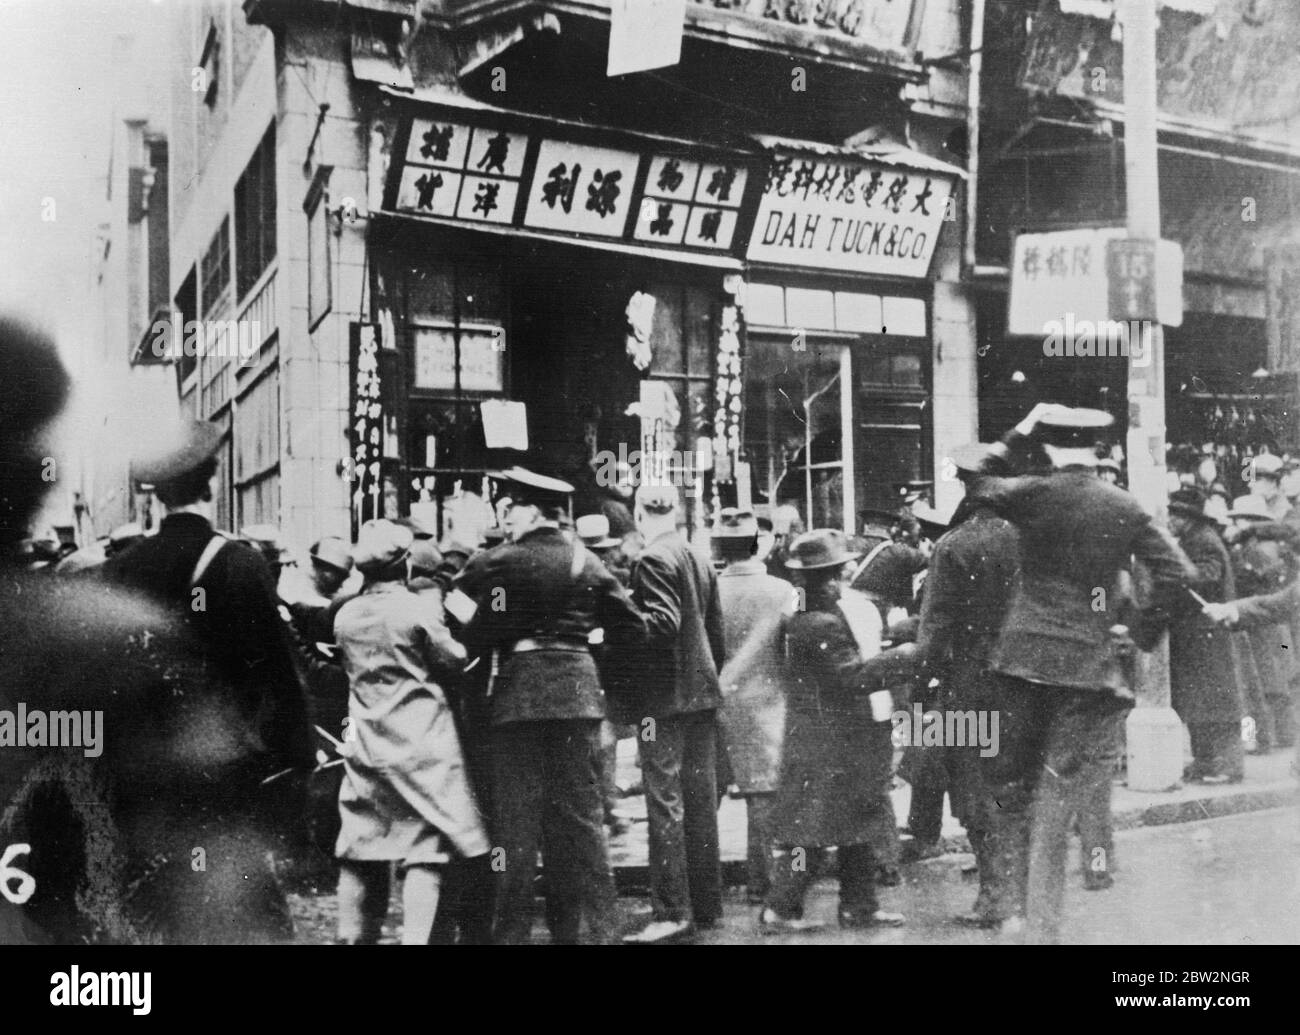 Japanese tear down Chinese boycott signs in the international settlement . The japanese feeling against the Chinese in the international settlement is particlarly bitter , especially against the Chinese campaign of boycotting japanese goods . Japanese residents in the international Settlemet tearing down Chinese Anti Japanese boycott signs .. 25 February 1932 30s, 30's, 1930s, 1930's, thirties, nineteen thirties Stock Photo